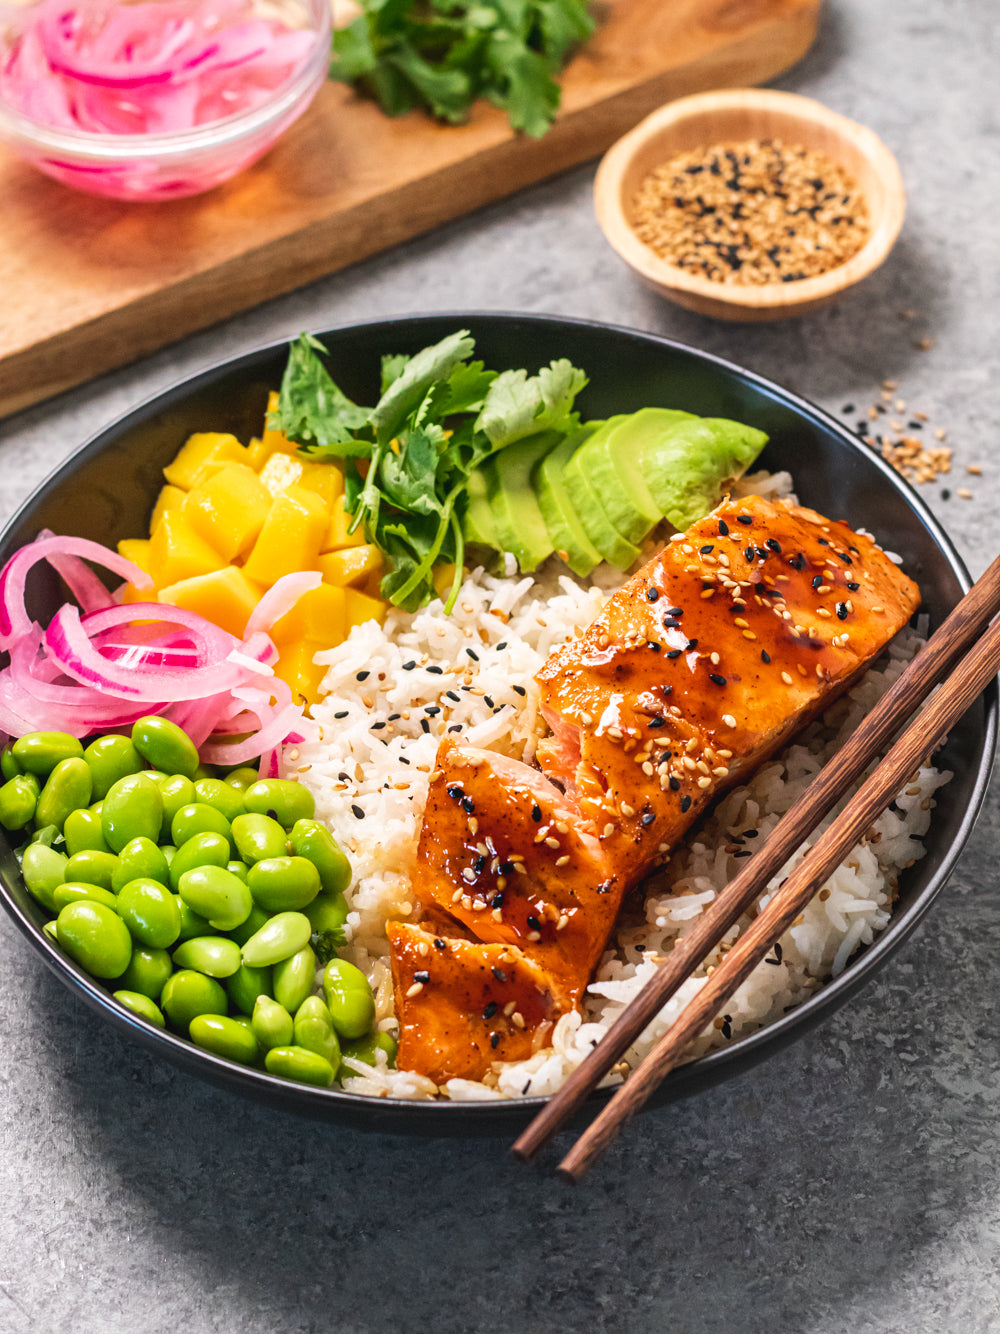 20 Easy Rice Bowl Recipes - Healthy Rice Bowl Meal Ideas